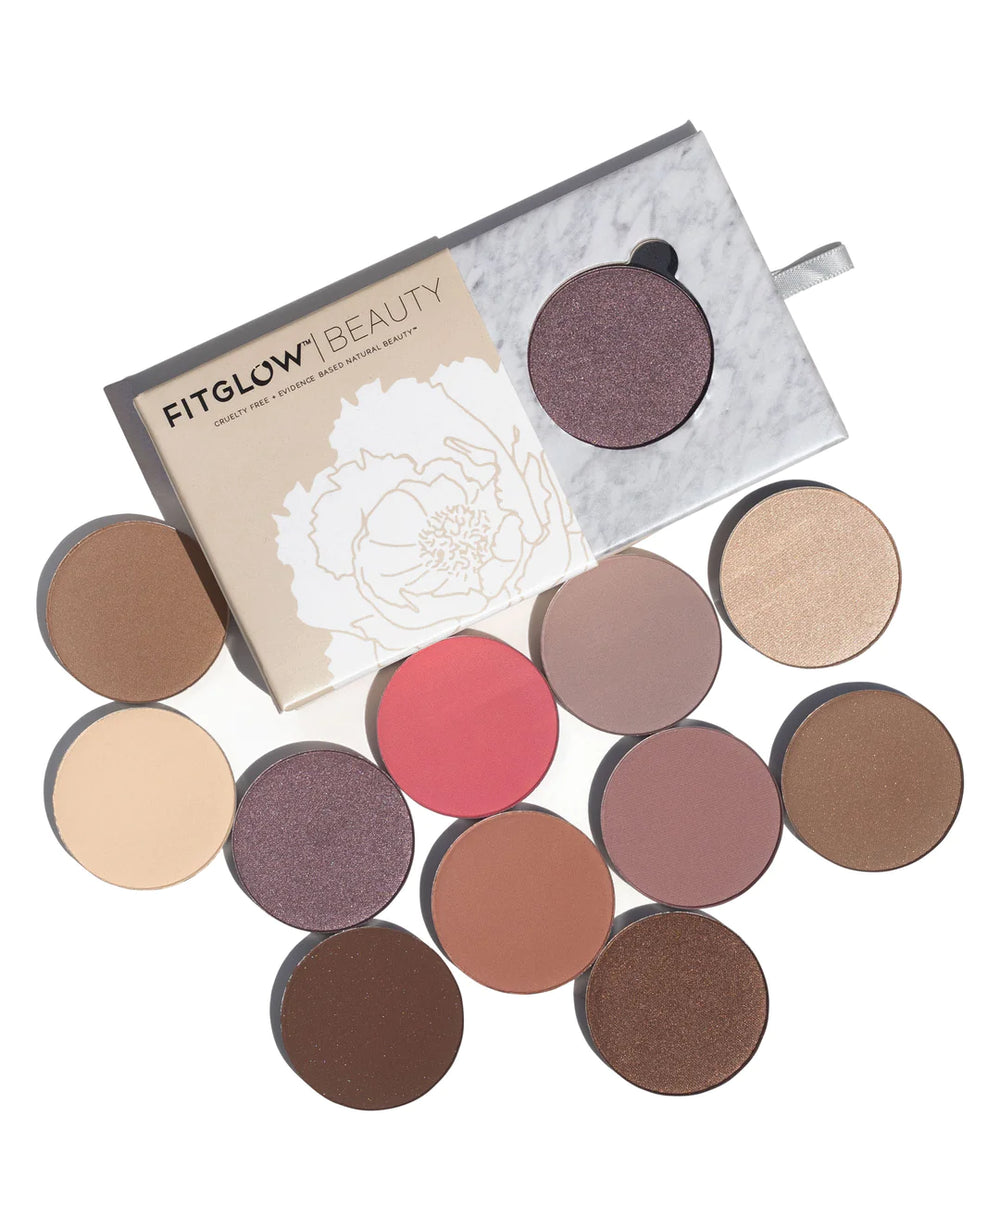 FITGLOW BEAUTY - multi use pressed shadow and blush - displayed with all 12 shades of round small palettes on a white clean background.